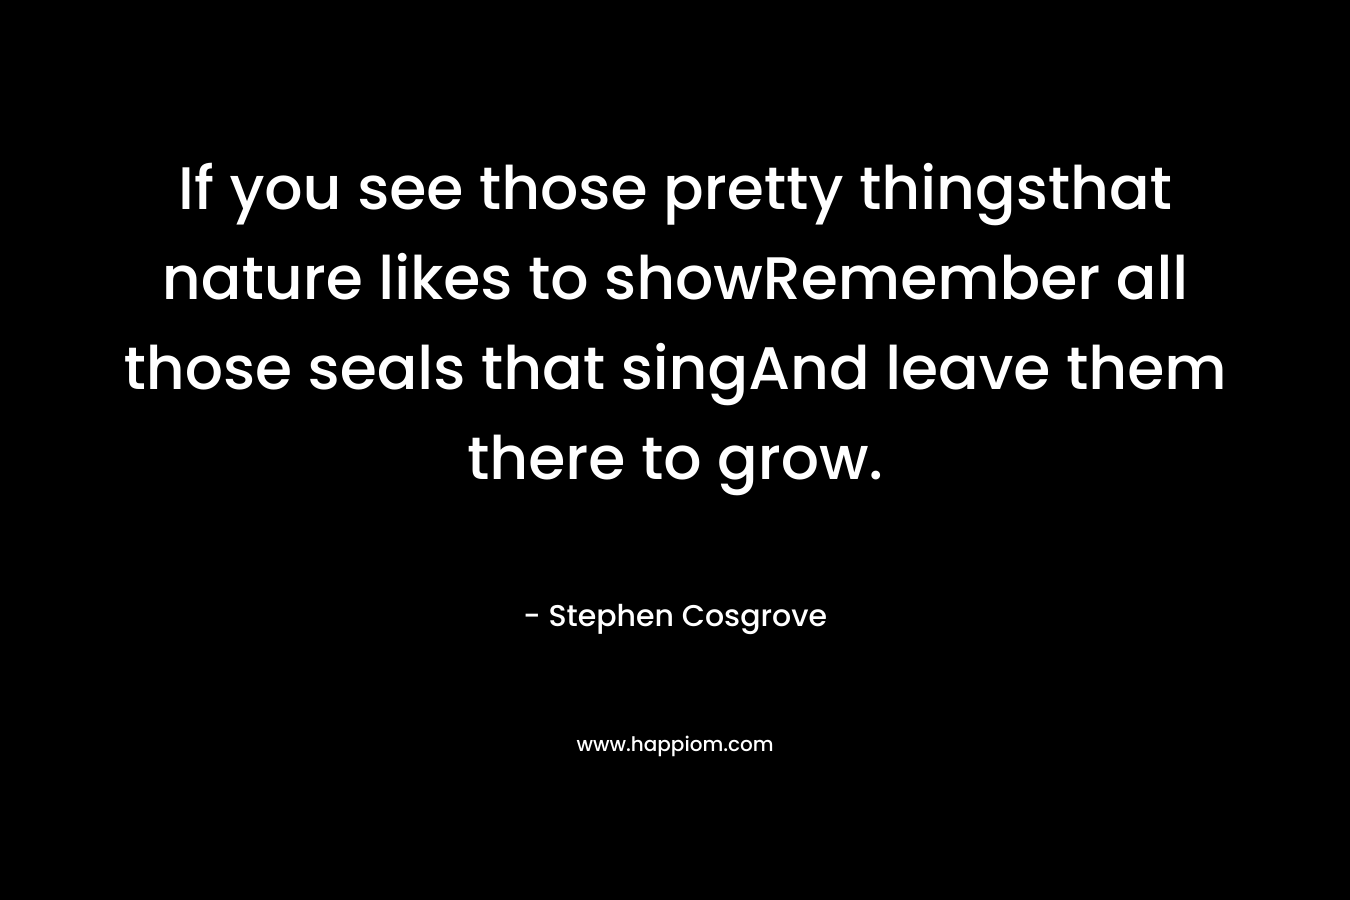 If you see those pretty thingsthat nature likes to showRemember all those seals that singAnd leave them there to grow. – Stephen Cosgrove